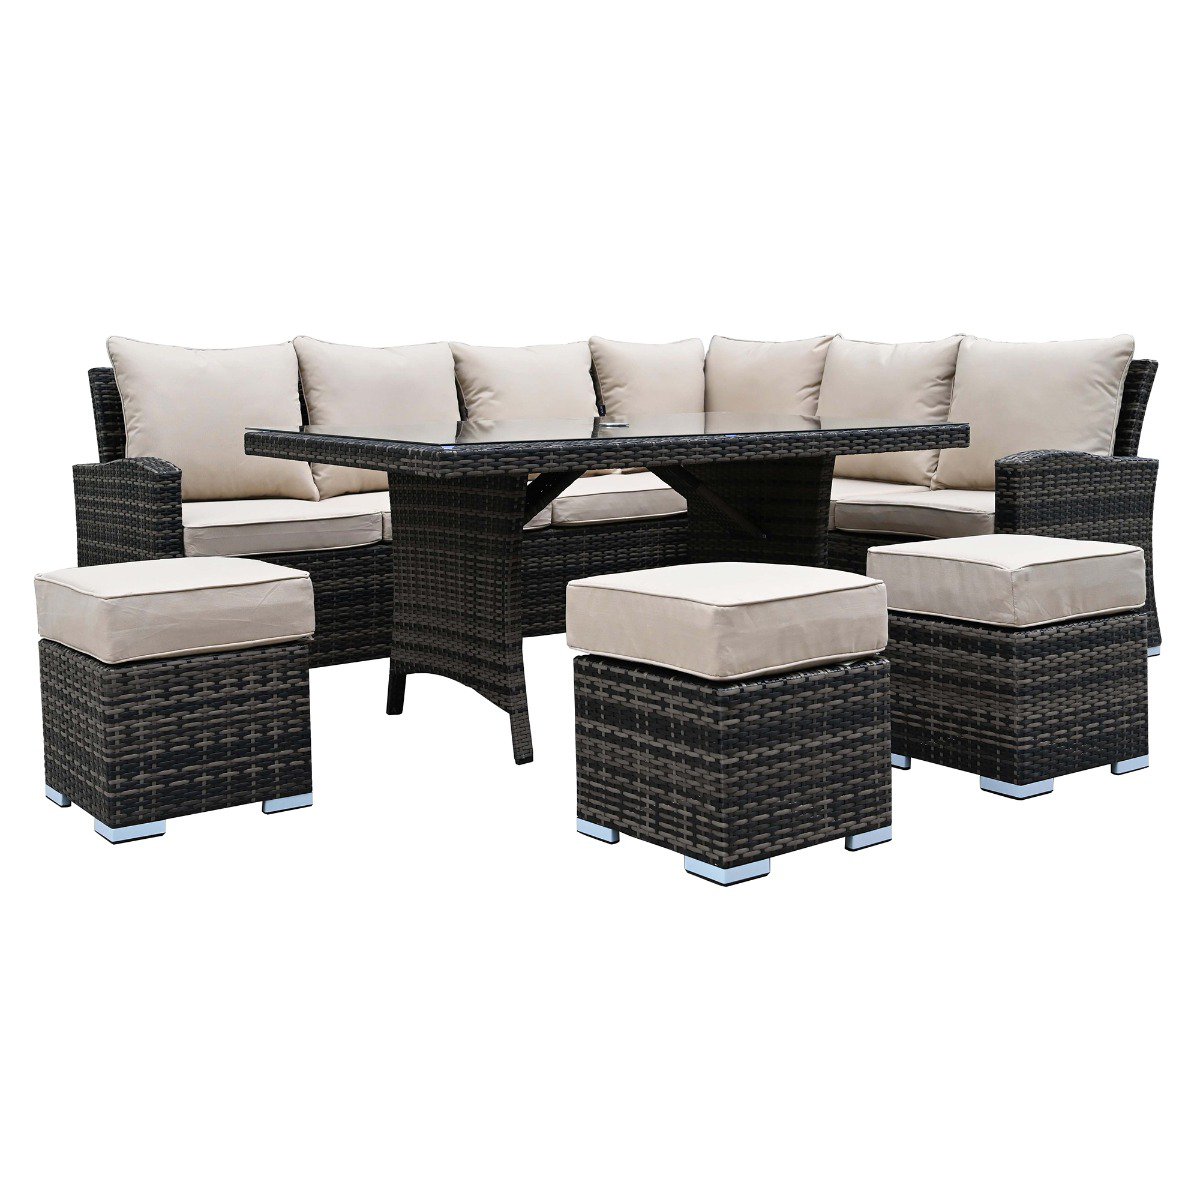 Beadnell Corner Garden Dining Set in Brown Weave and Beige Fabric